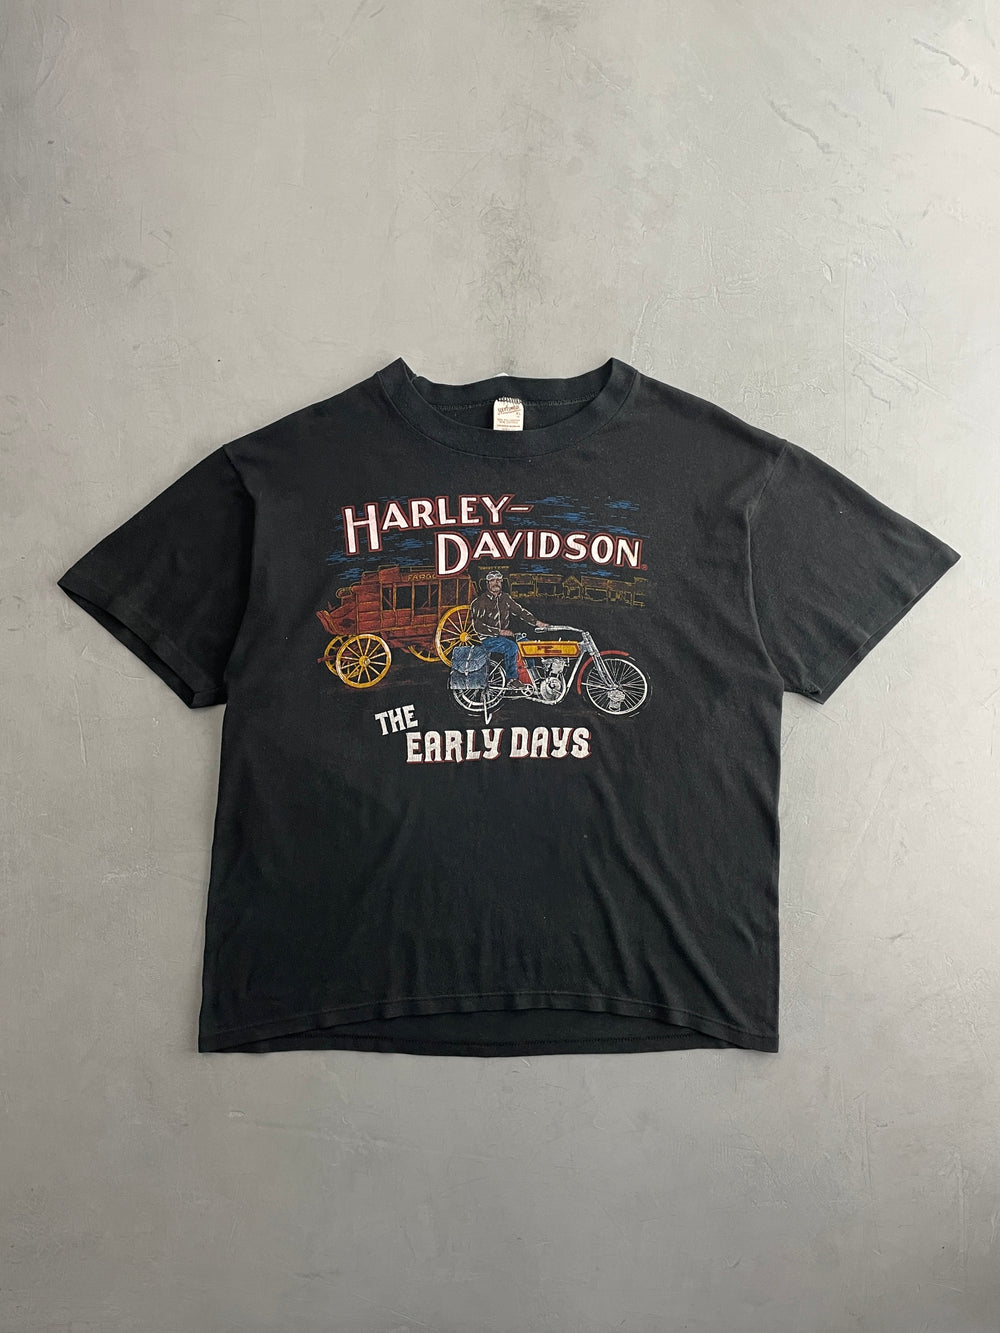 80's Harley Davidson 'The Early Days' Tee [XL]